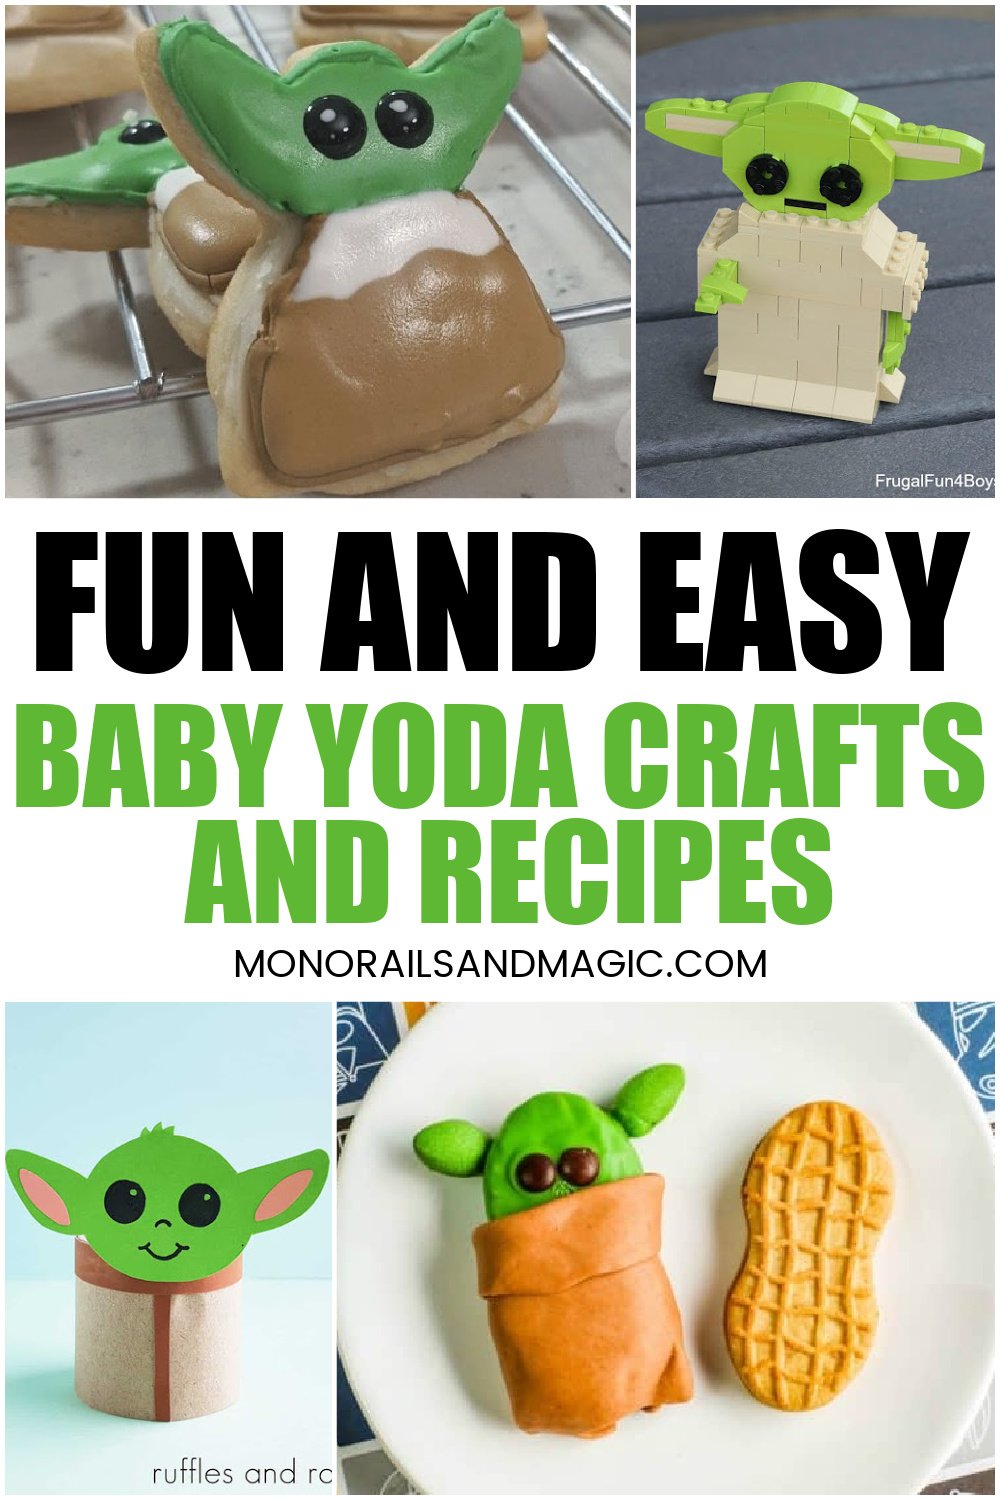 Fun and easy Baby Yoda themed crafts and recipes.